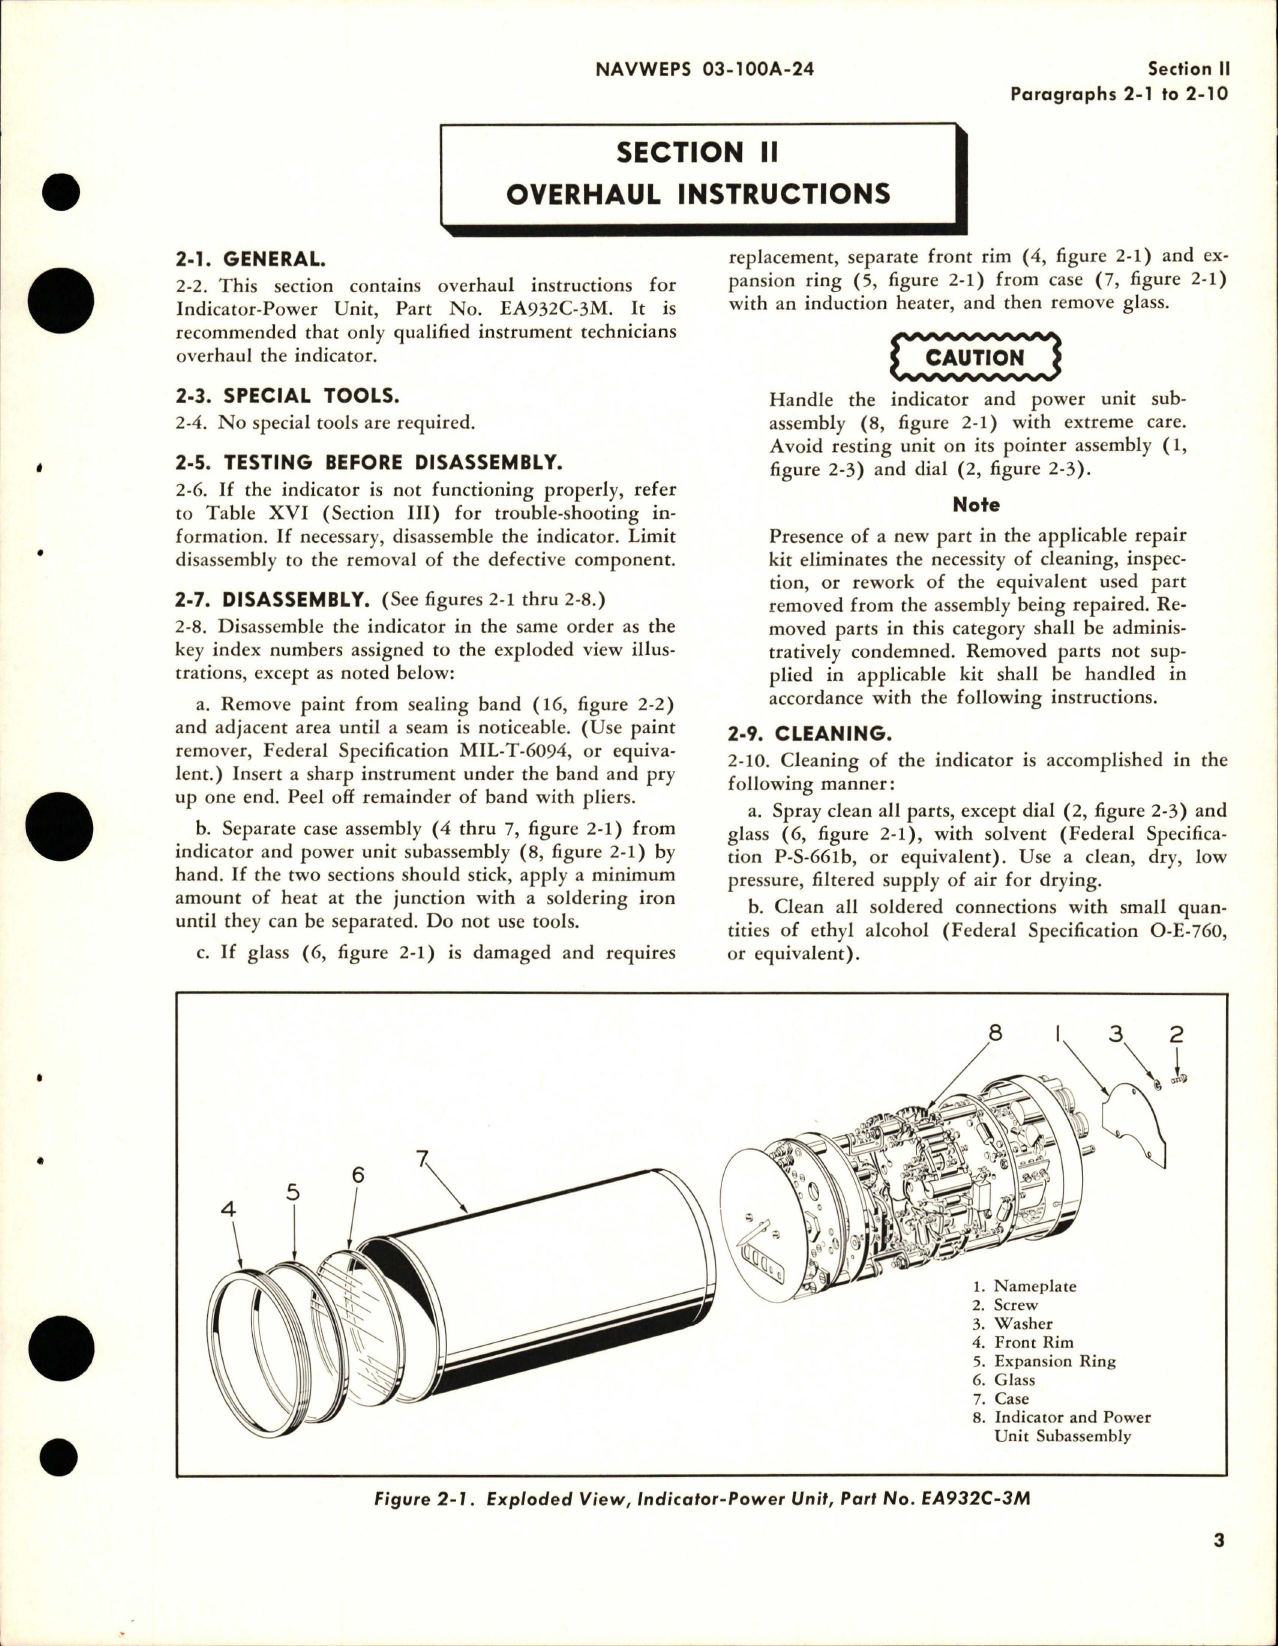 Sample page 7 from AirCorps Library document: Overhaul Instructions for Indicator-Power Unit - Part EA932C-3M